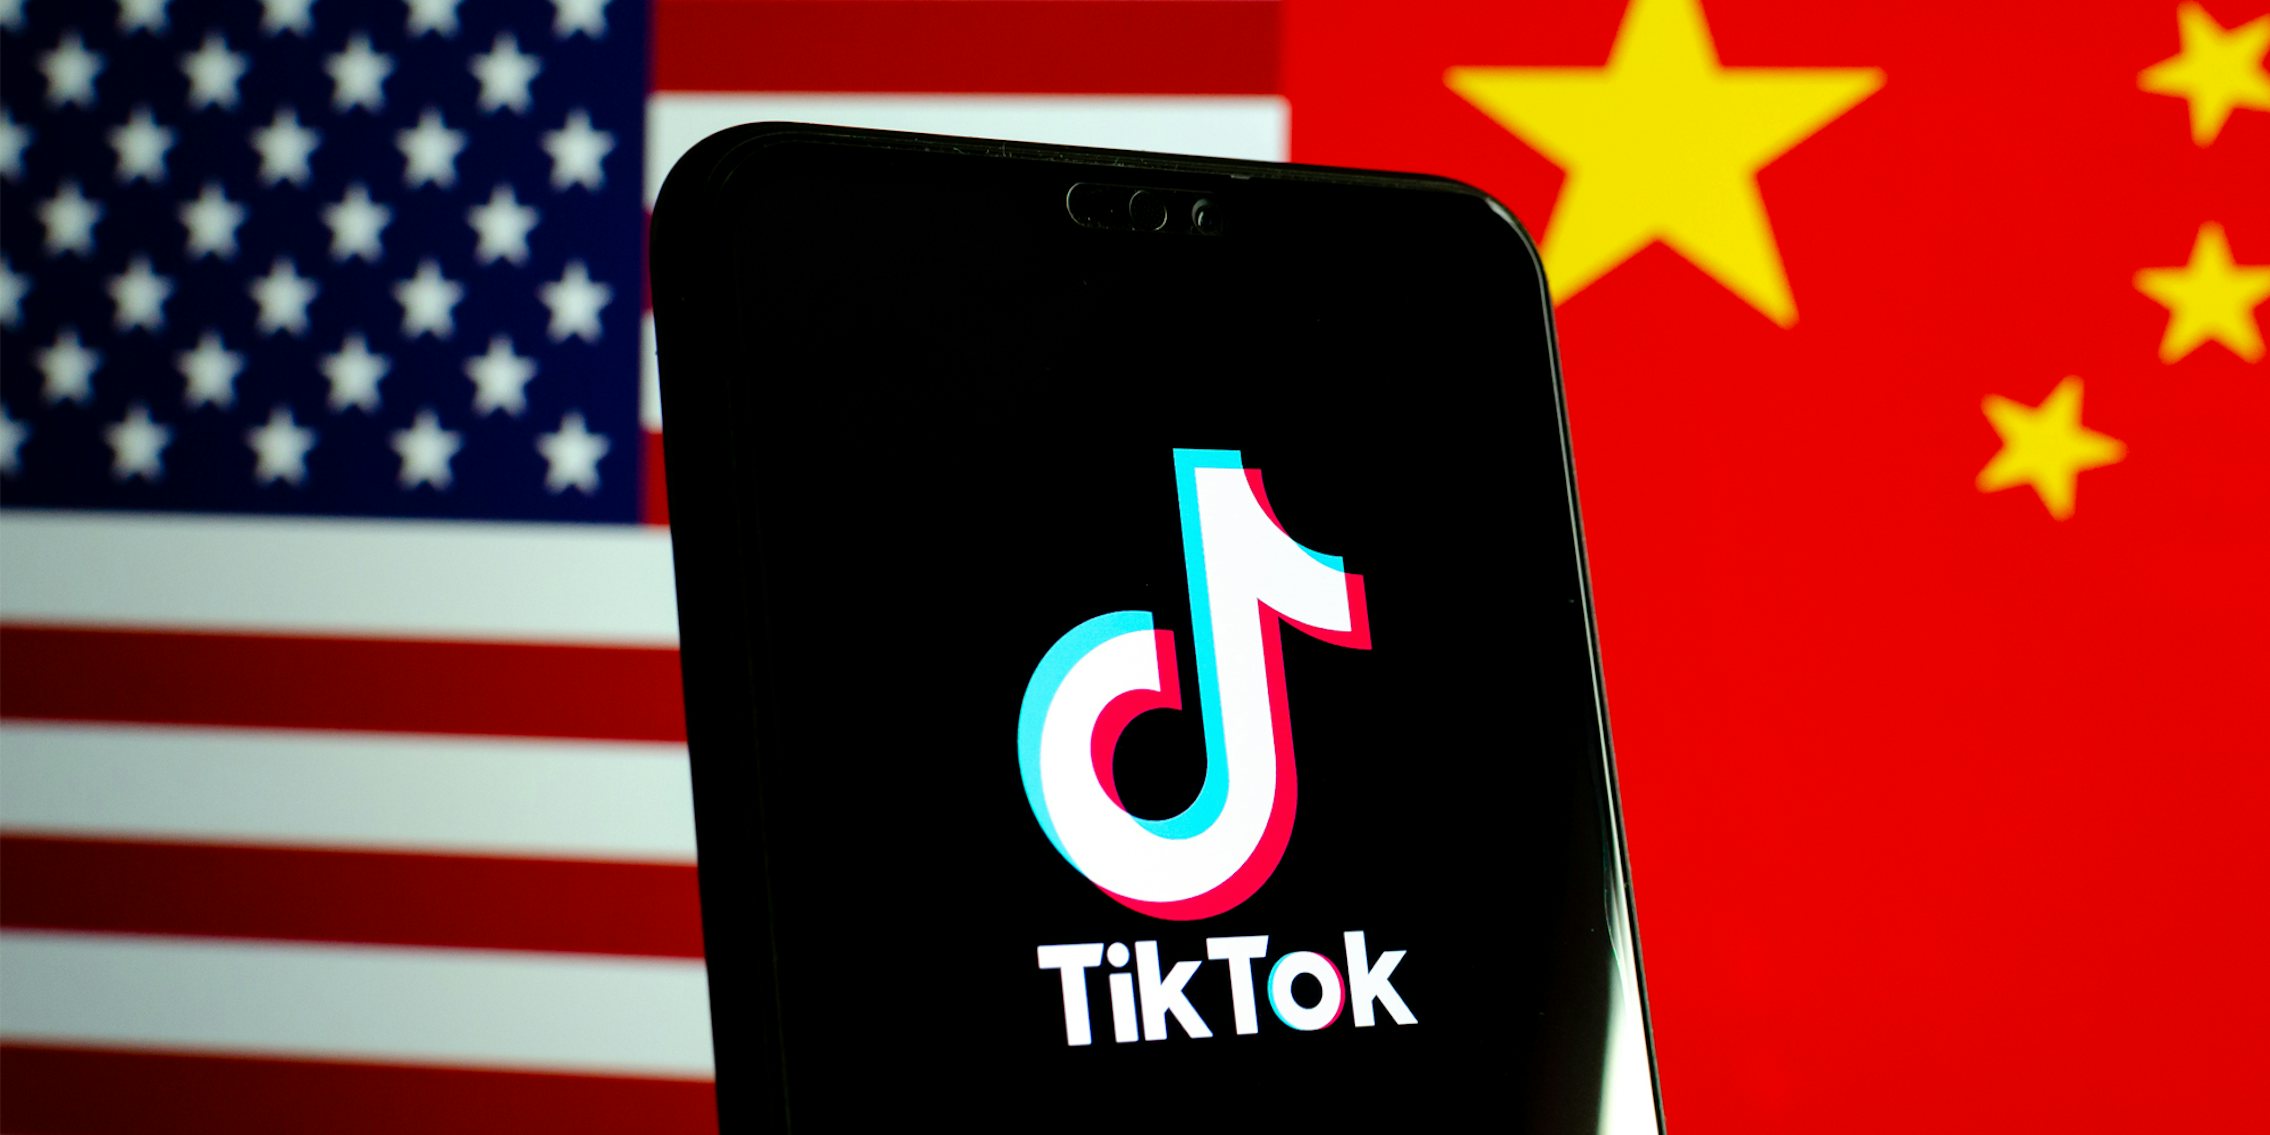 TikTok on phone screen in front of half split US flag and China flag background